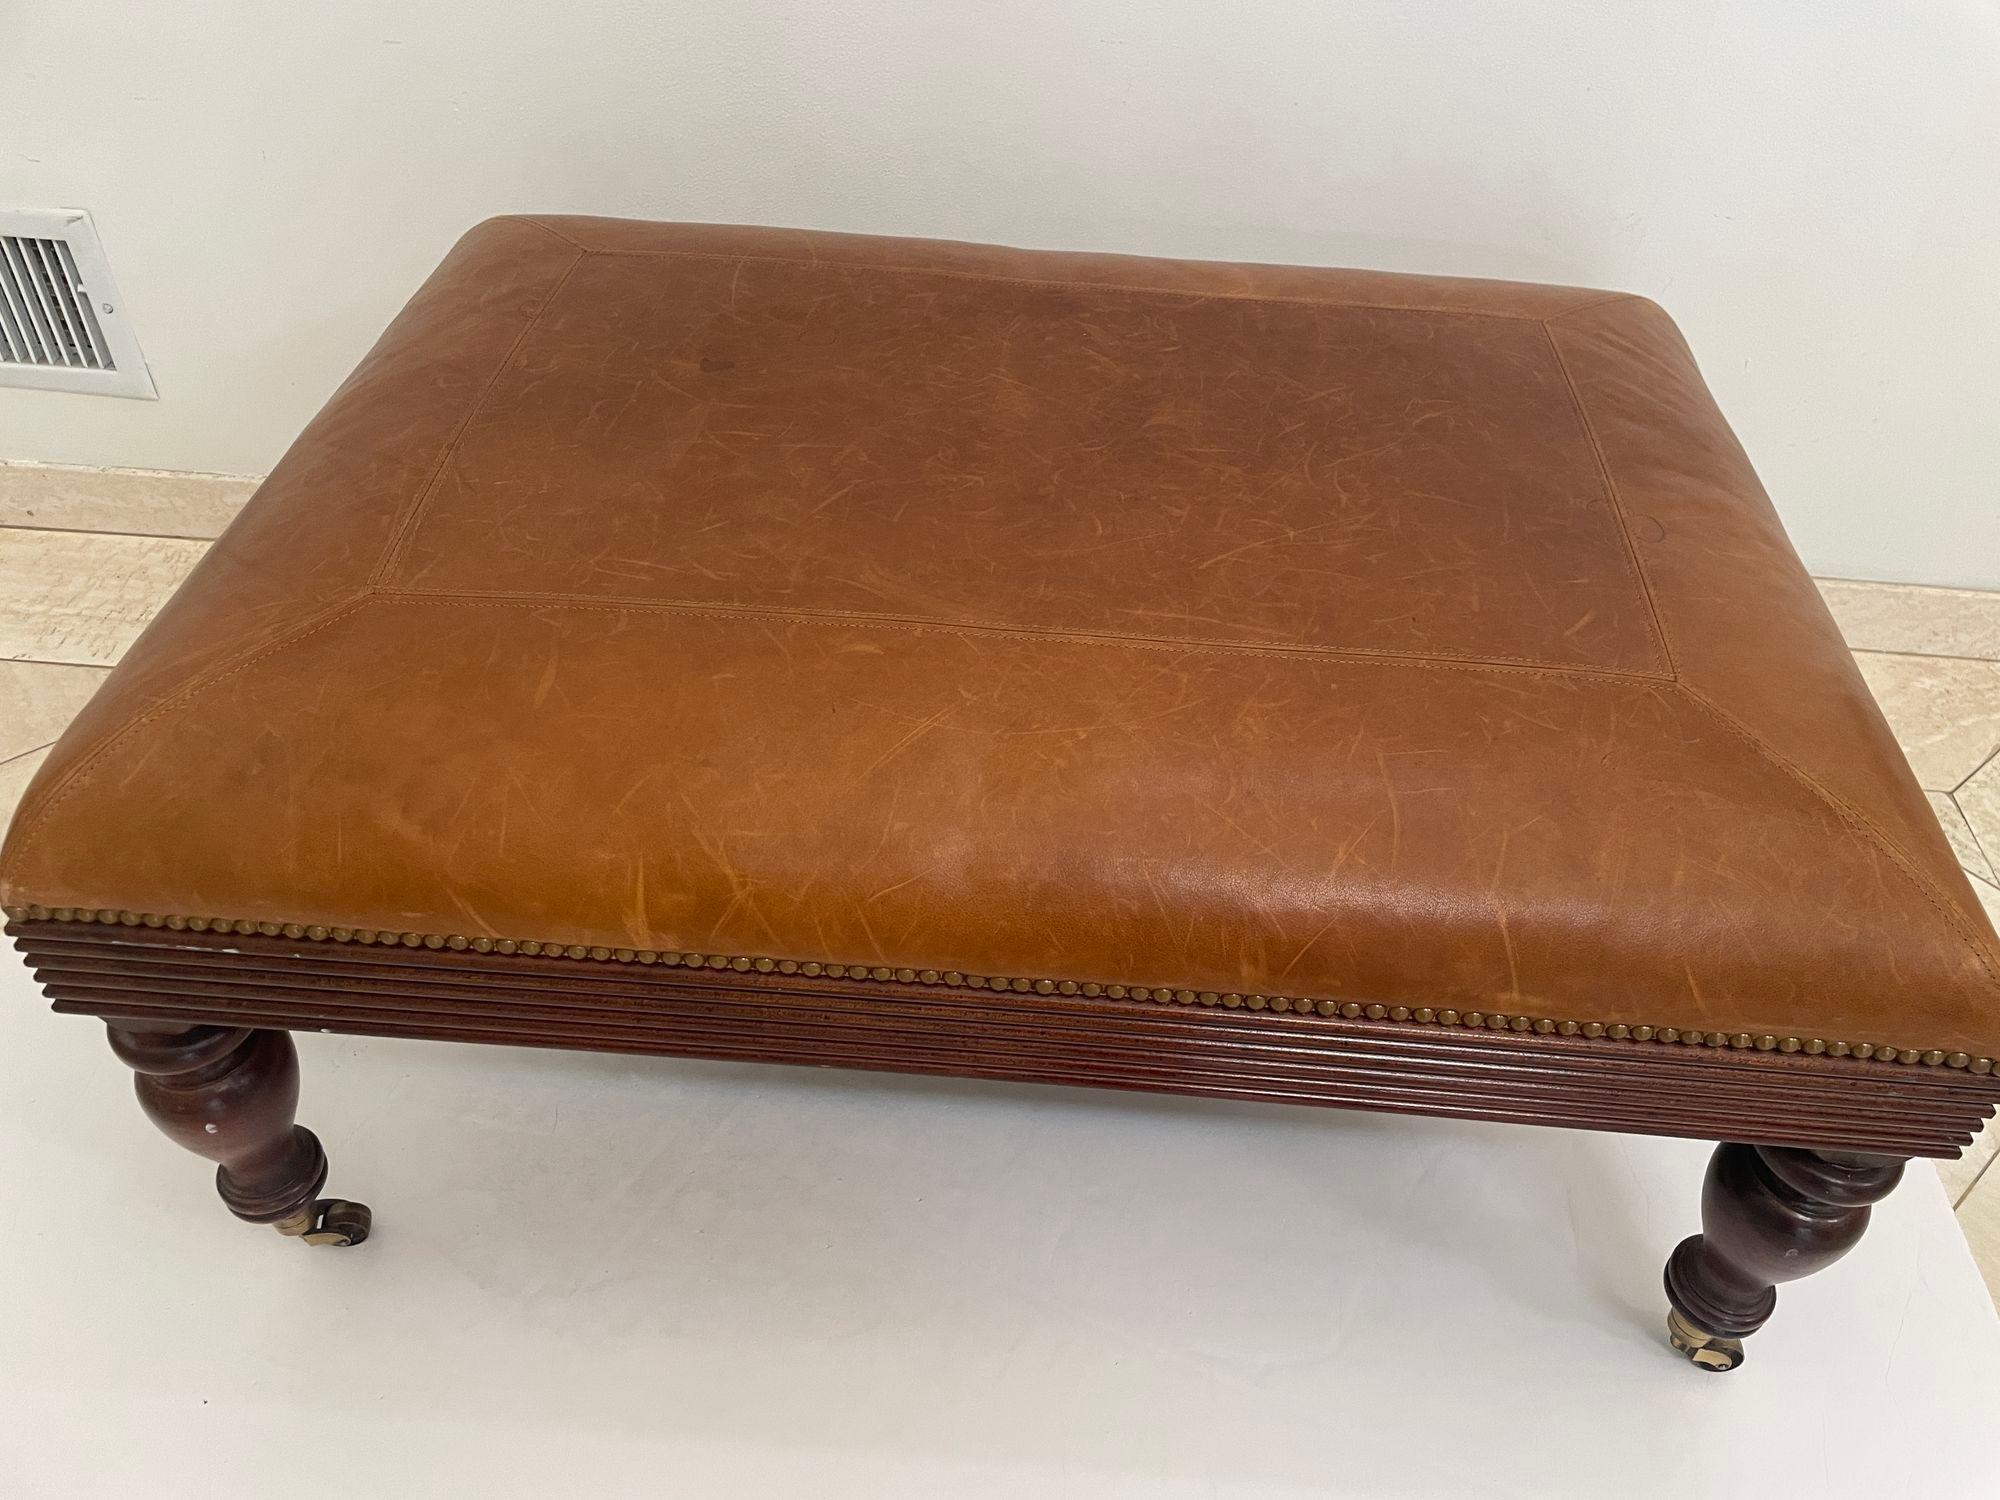 Victorian English Style leather Ottoman with Brass Casters and Nailhead Trim For Sale 8